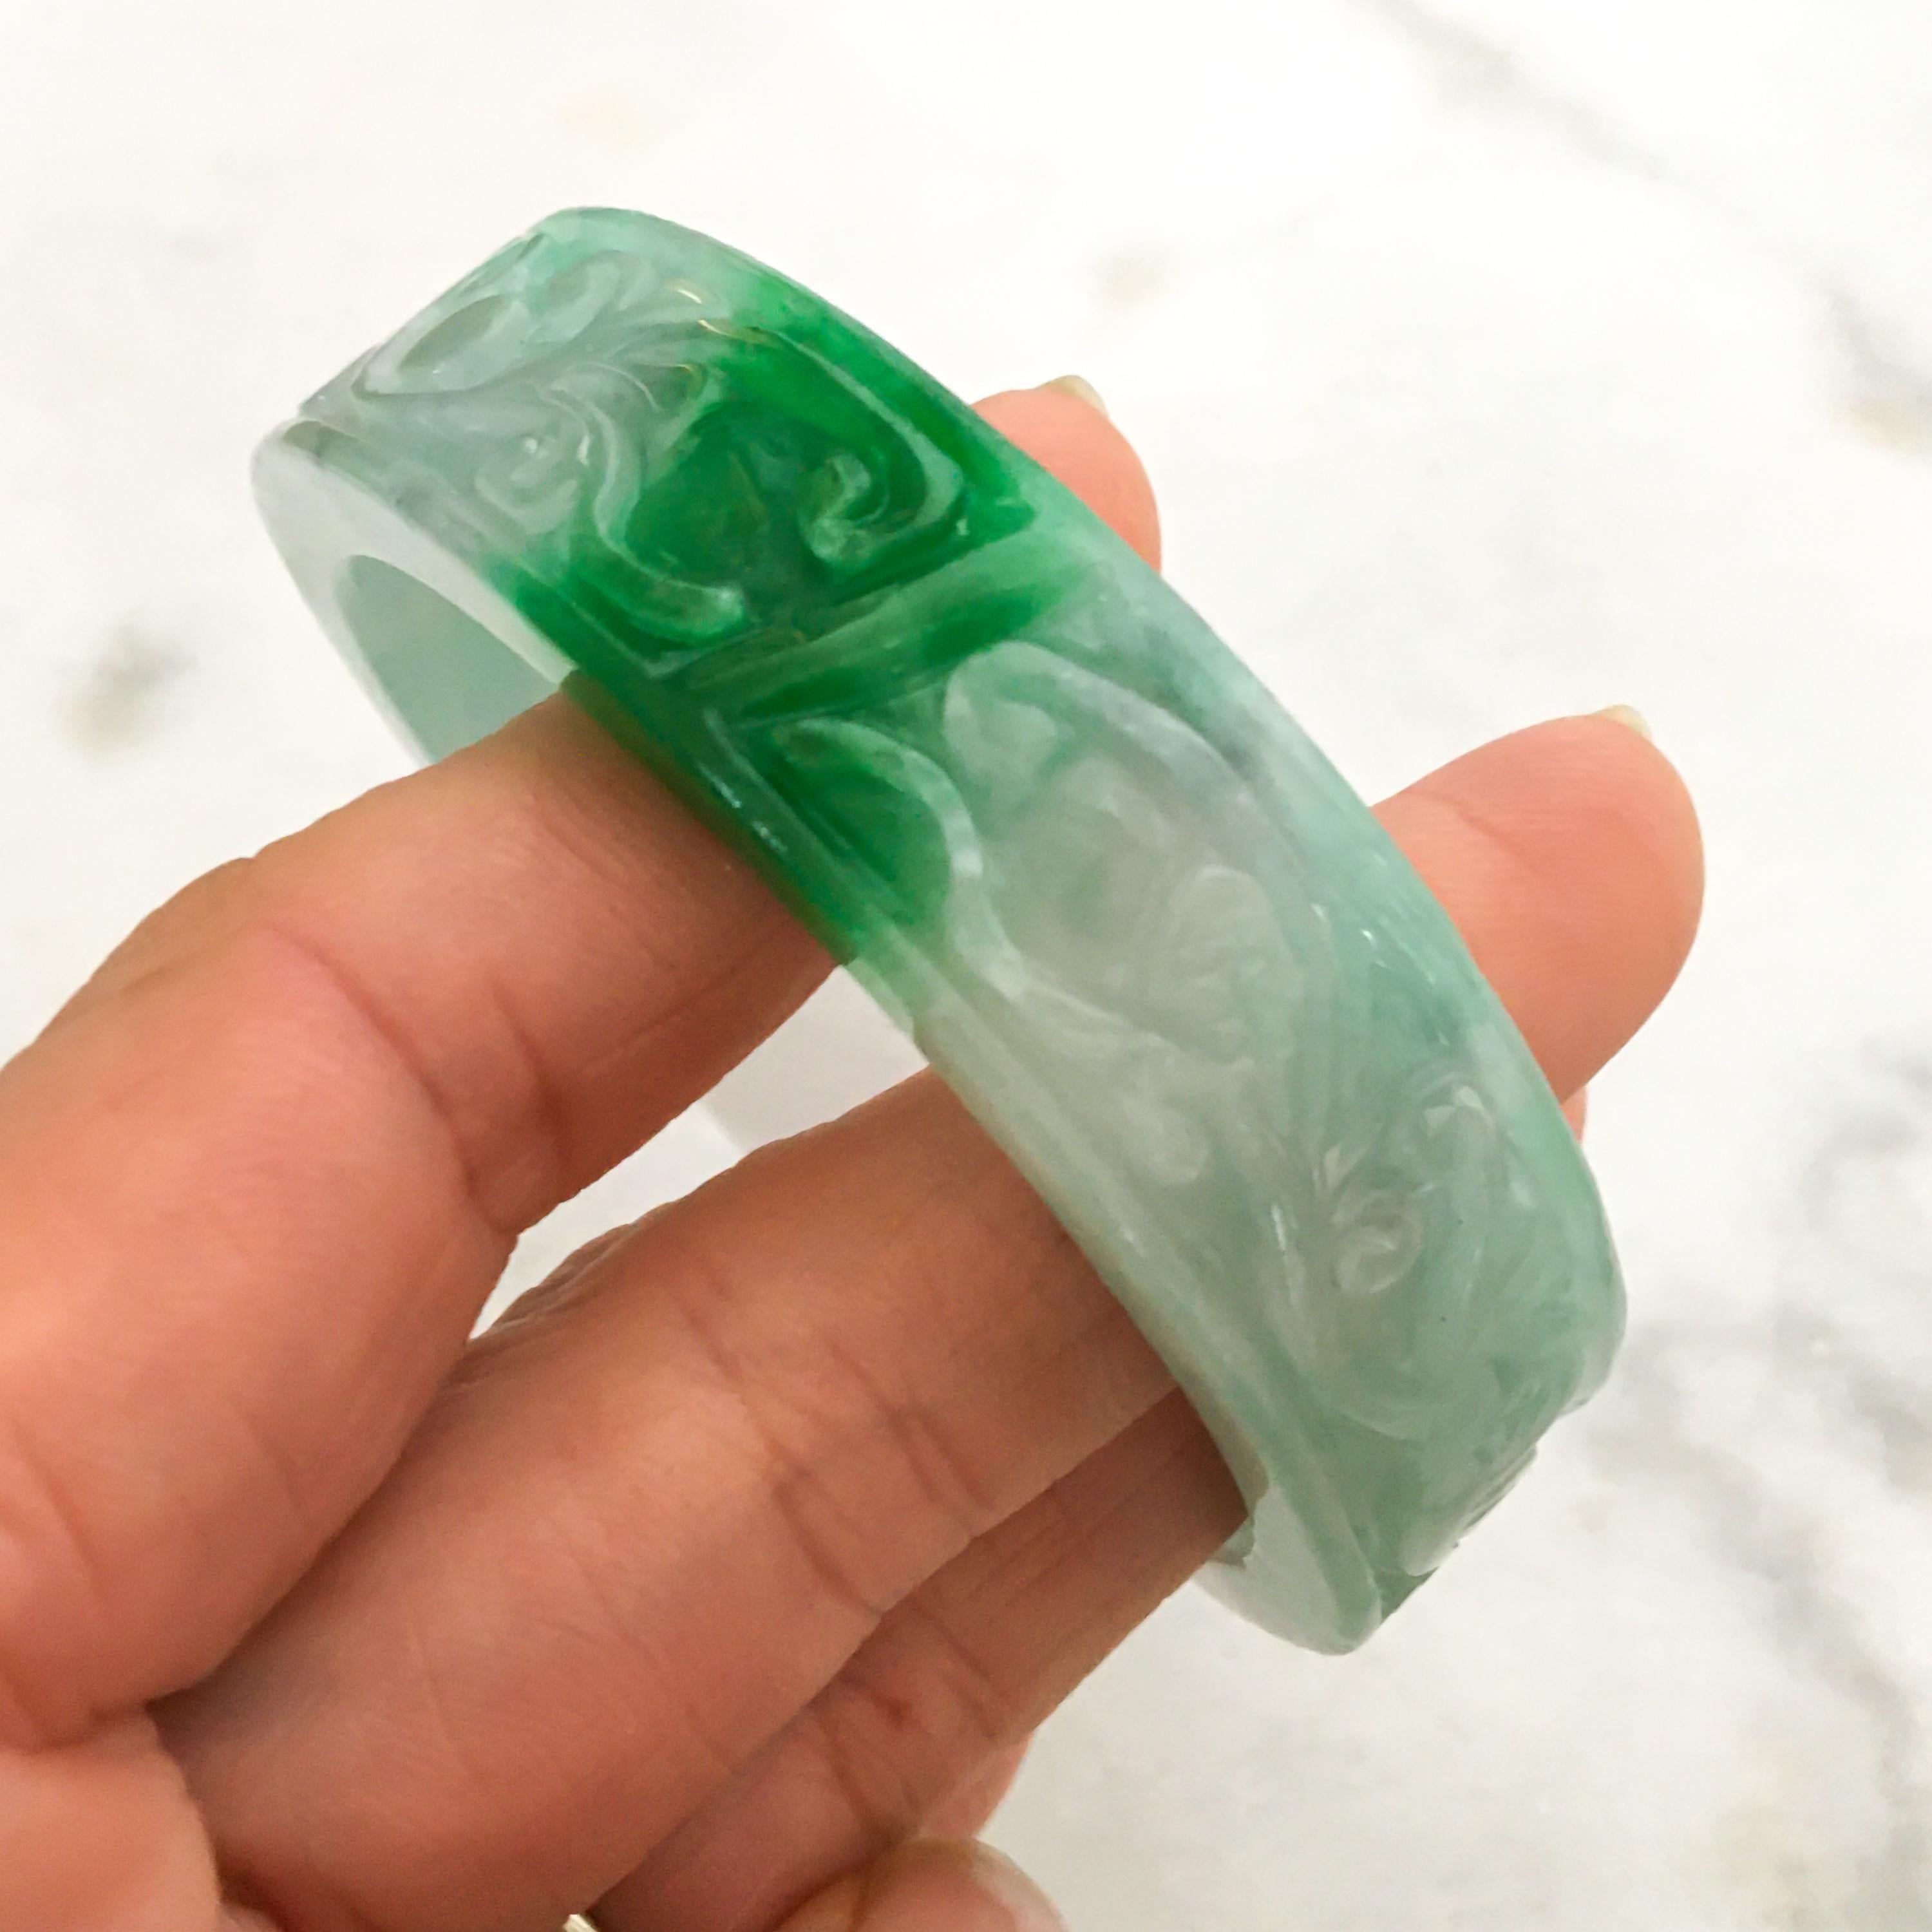 This natural jadeite jade carved bangle bracelet has a beautiful translucent mottled green and white color. This Burmese jade bangle is beautifully carved and dates from the 1950s-1960s. 

The bangle measurements - outer diameter is 75.3 mm, width